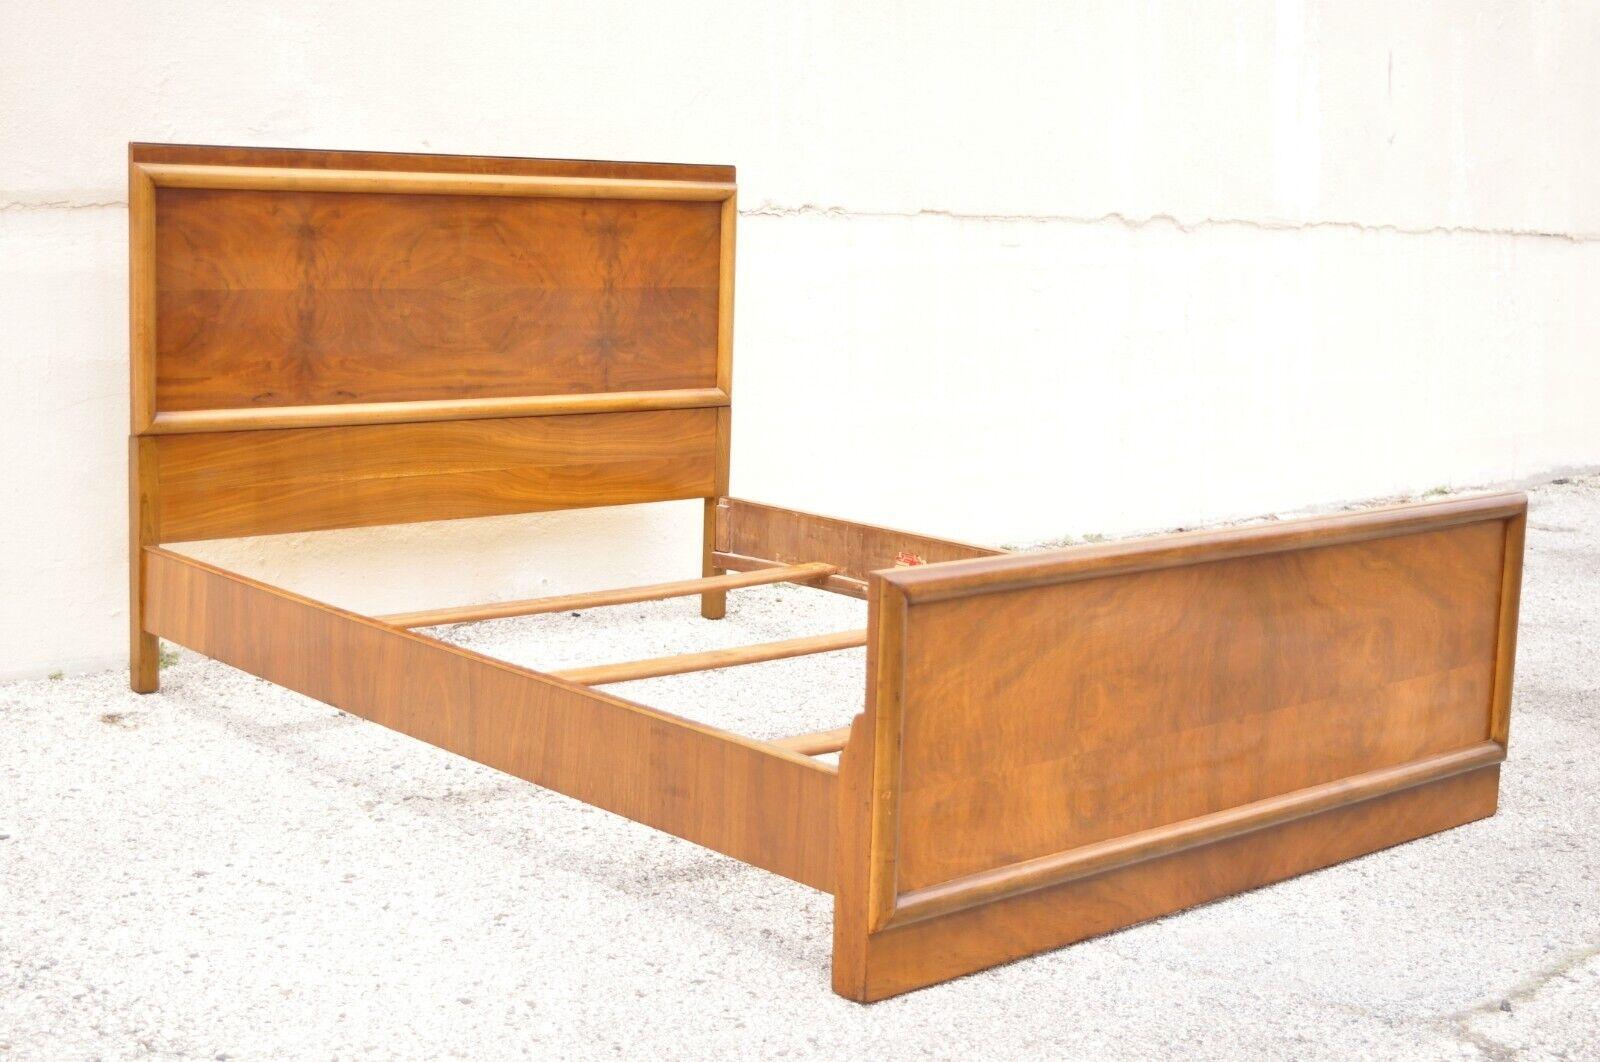 Joerns Bros Art Deco Burl Wood Walnut Full Size Bed Frame. Item features full size frame, rolling casters, beautiful wood grain, original label, very nice vintage item, clean modernist lines, quality American craftsmanship. Circa early to mid 20th